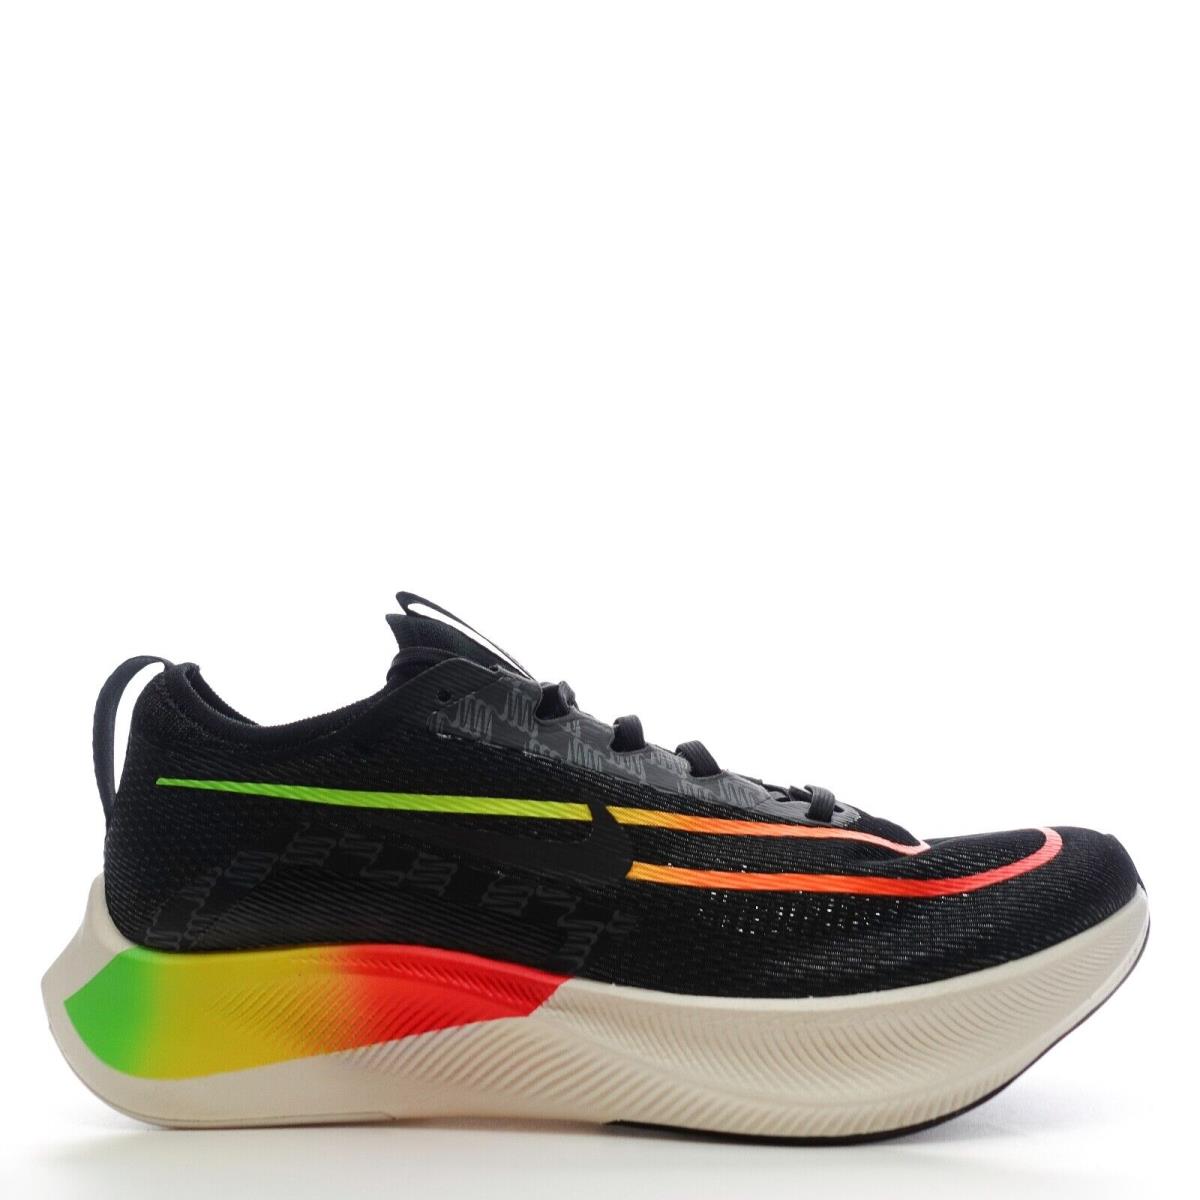 Mens Size 12 Nike Zoom Fly 4 Black Volt Running Shoes DQ4993 010